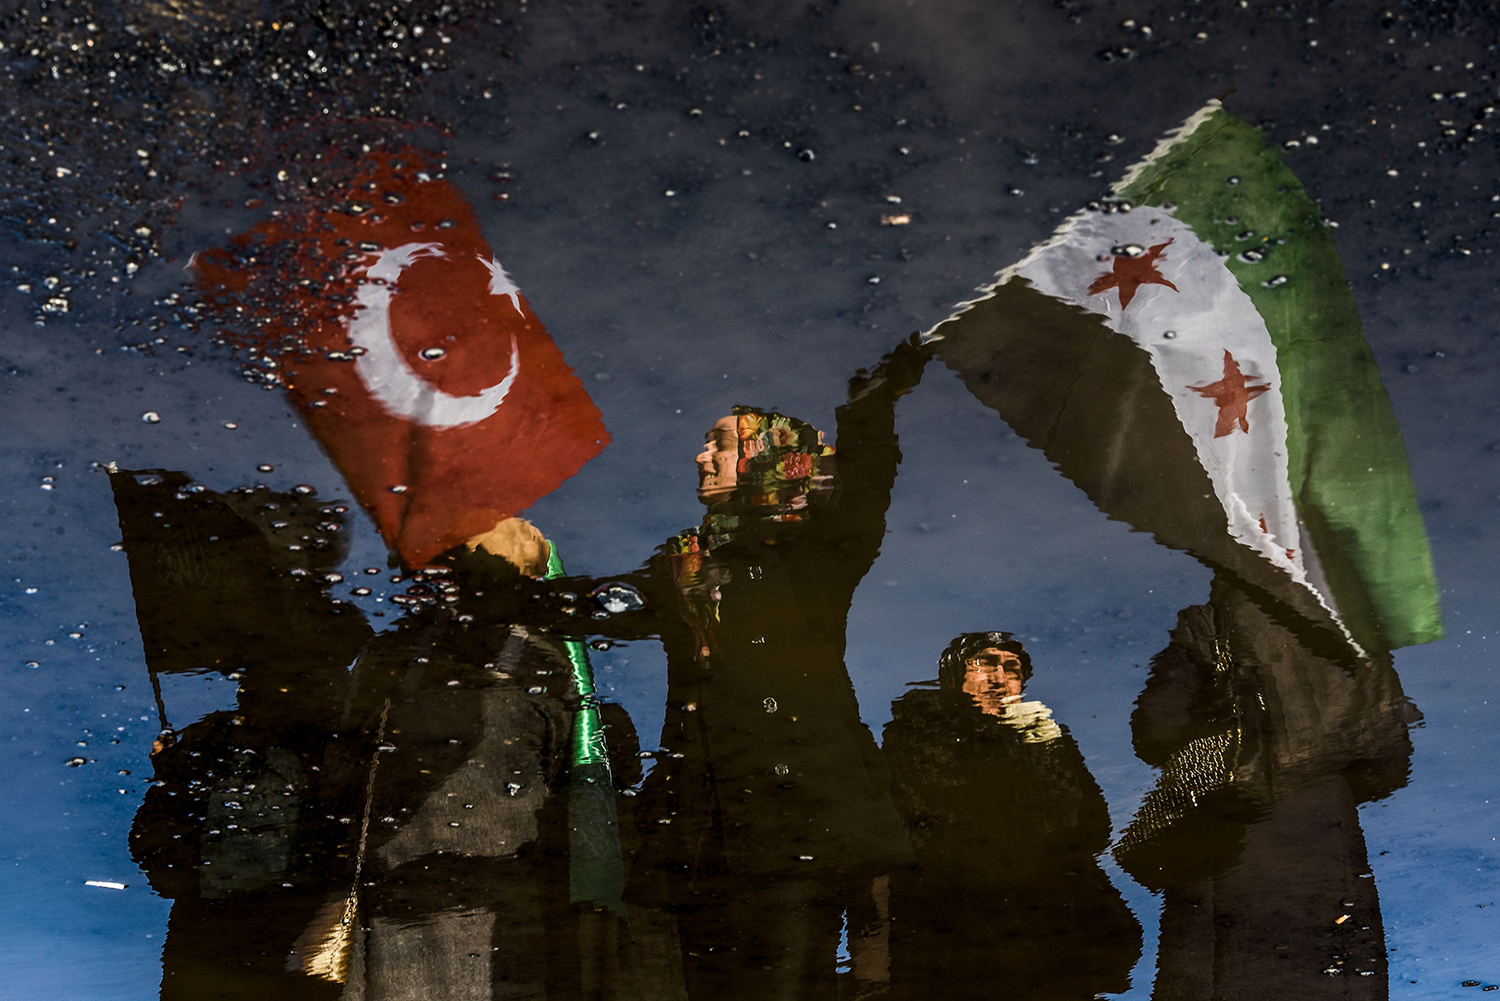 A reflection on waste liquid shows a woman wawing Turkish and Free Syrian flags as an aid convoy to Aleppo organized by IHH Humanitarian Relief Foundation is about to leave, on December 14, 2016 in Istanbul. Turkey's aid campaign for the besieged people of Aleppo continued with several nongovernmental organizations sending food, water and clothing. / AFP PHOTO / OZAN KOSE / TT / kod 444